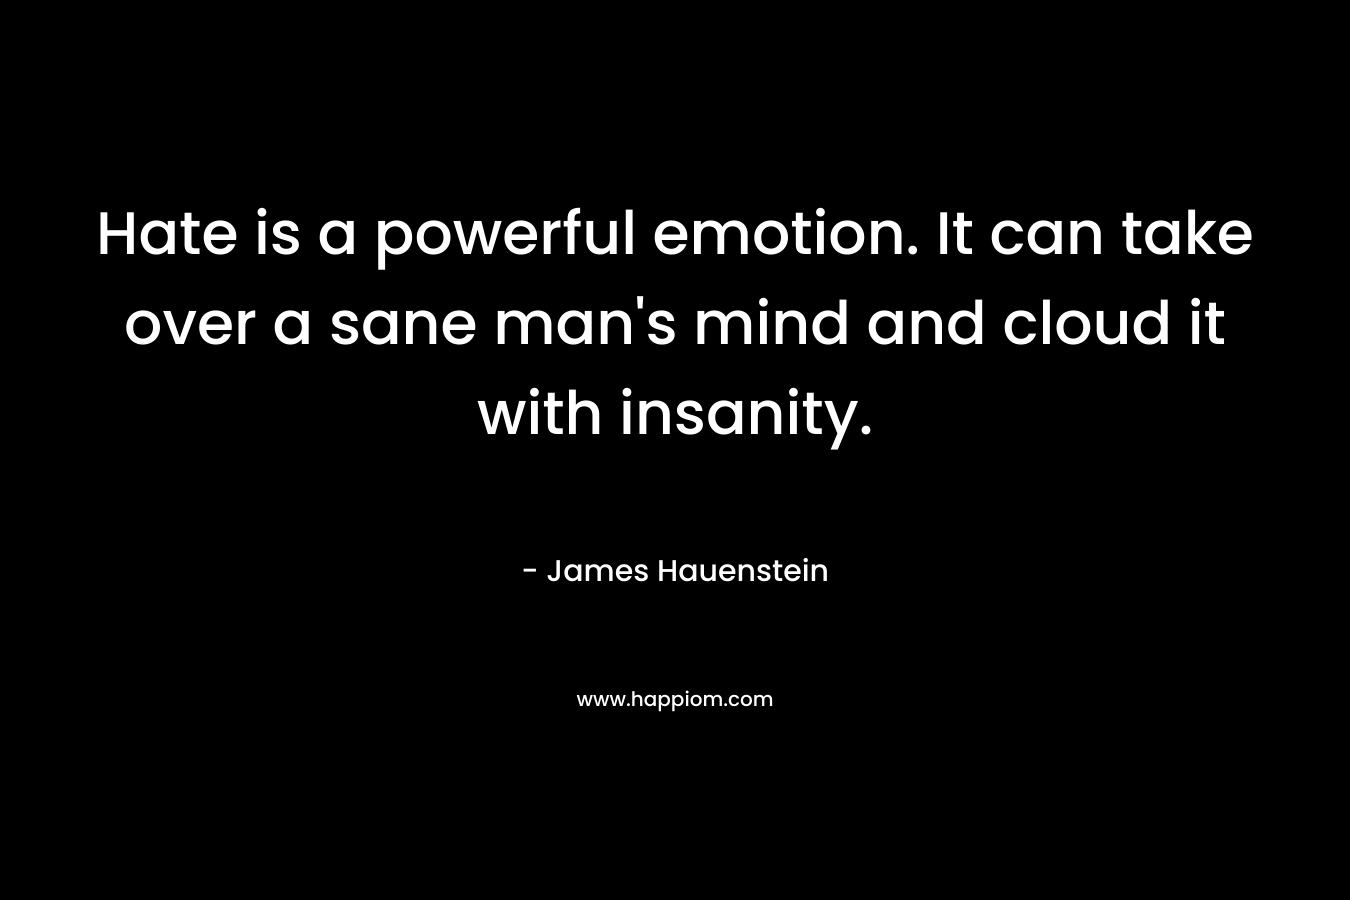 Hate is a powerful emotion. It can take over a sane man’s mind and cloud it with insanity. – James Hauenstein